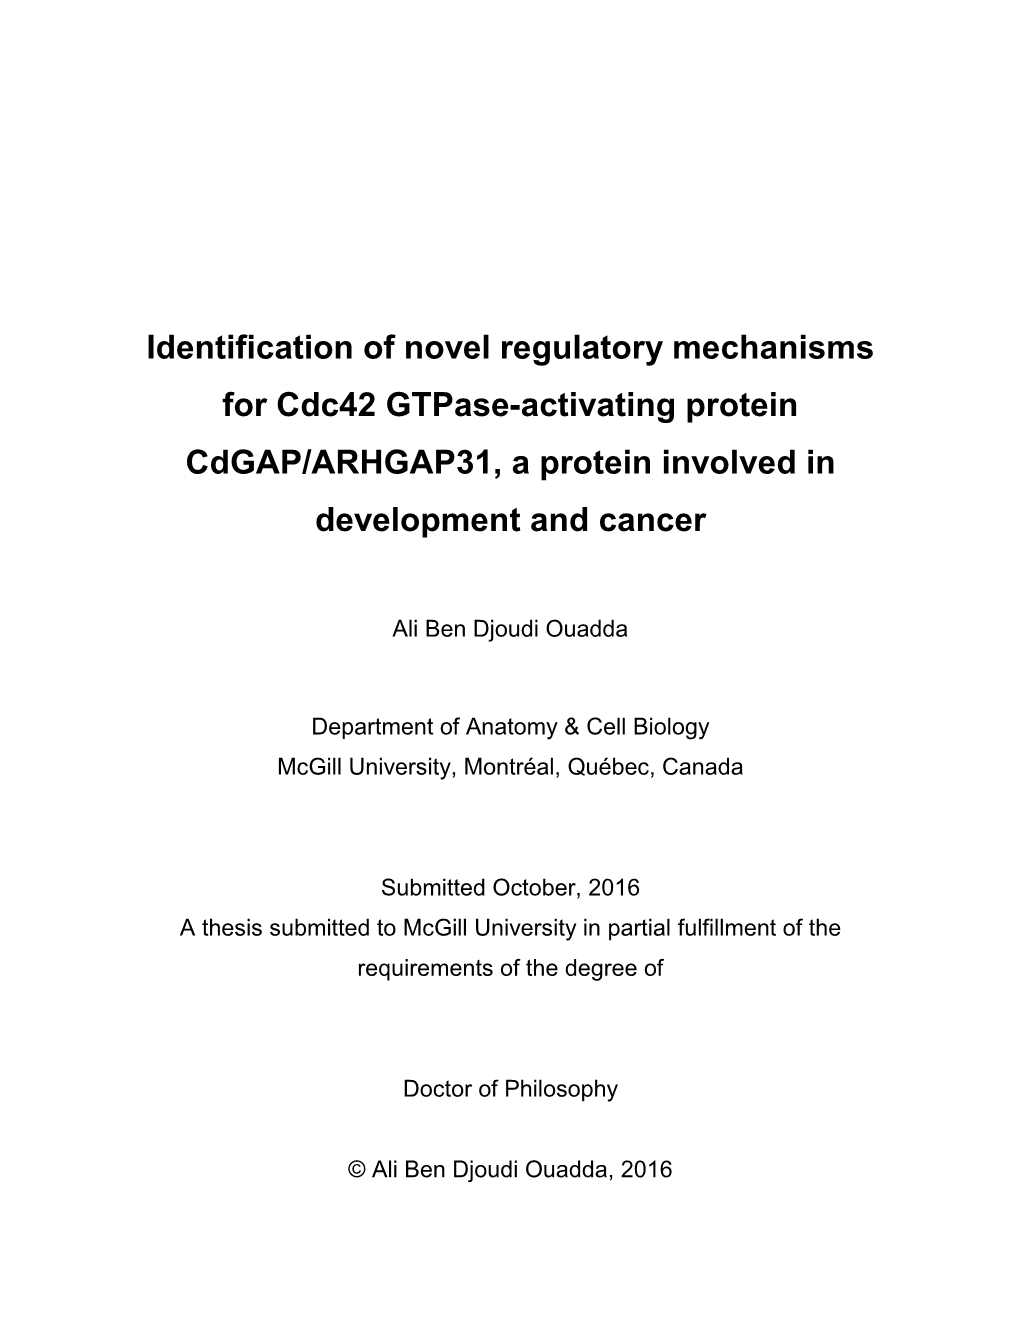 Identification of Novel Regulatory Mechanisms for Cdc42 Gtpase-Activating Protein Cdgap/ARHGAP31, a Protein Involved in Development and Cancer